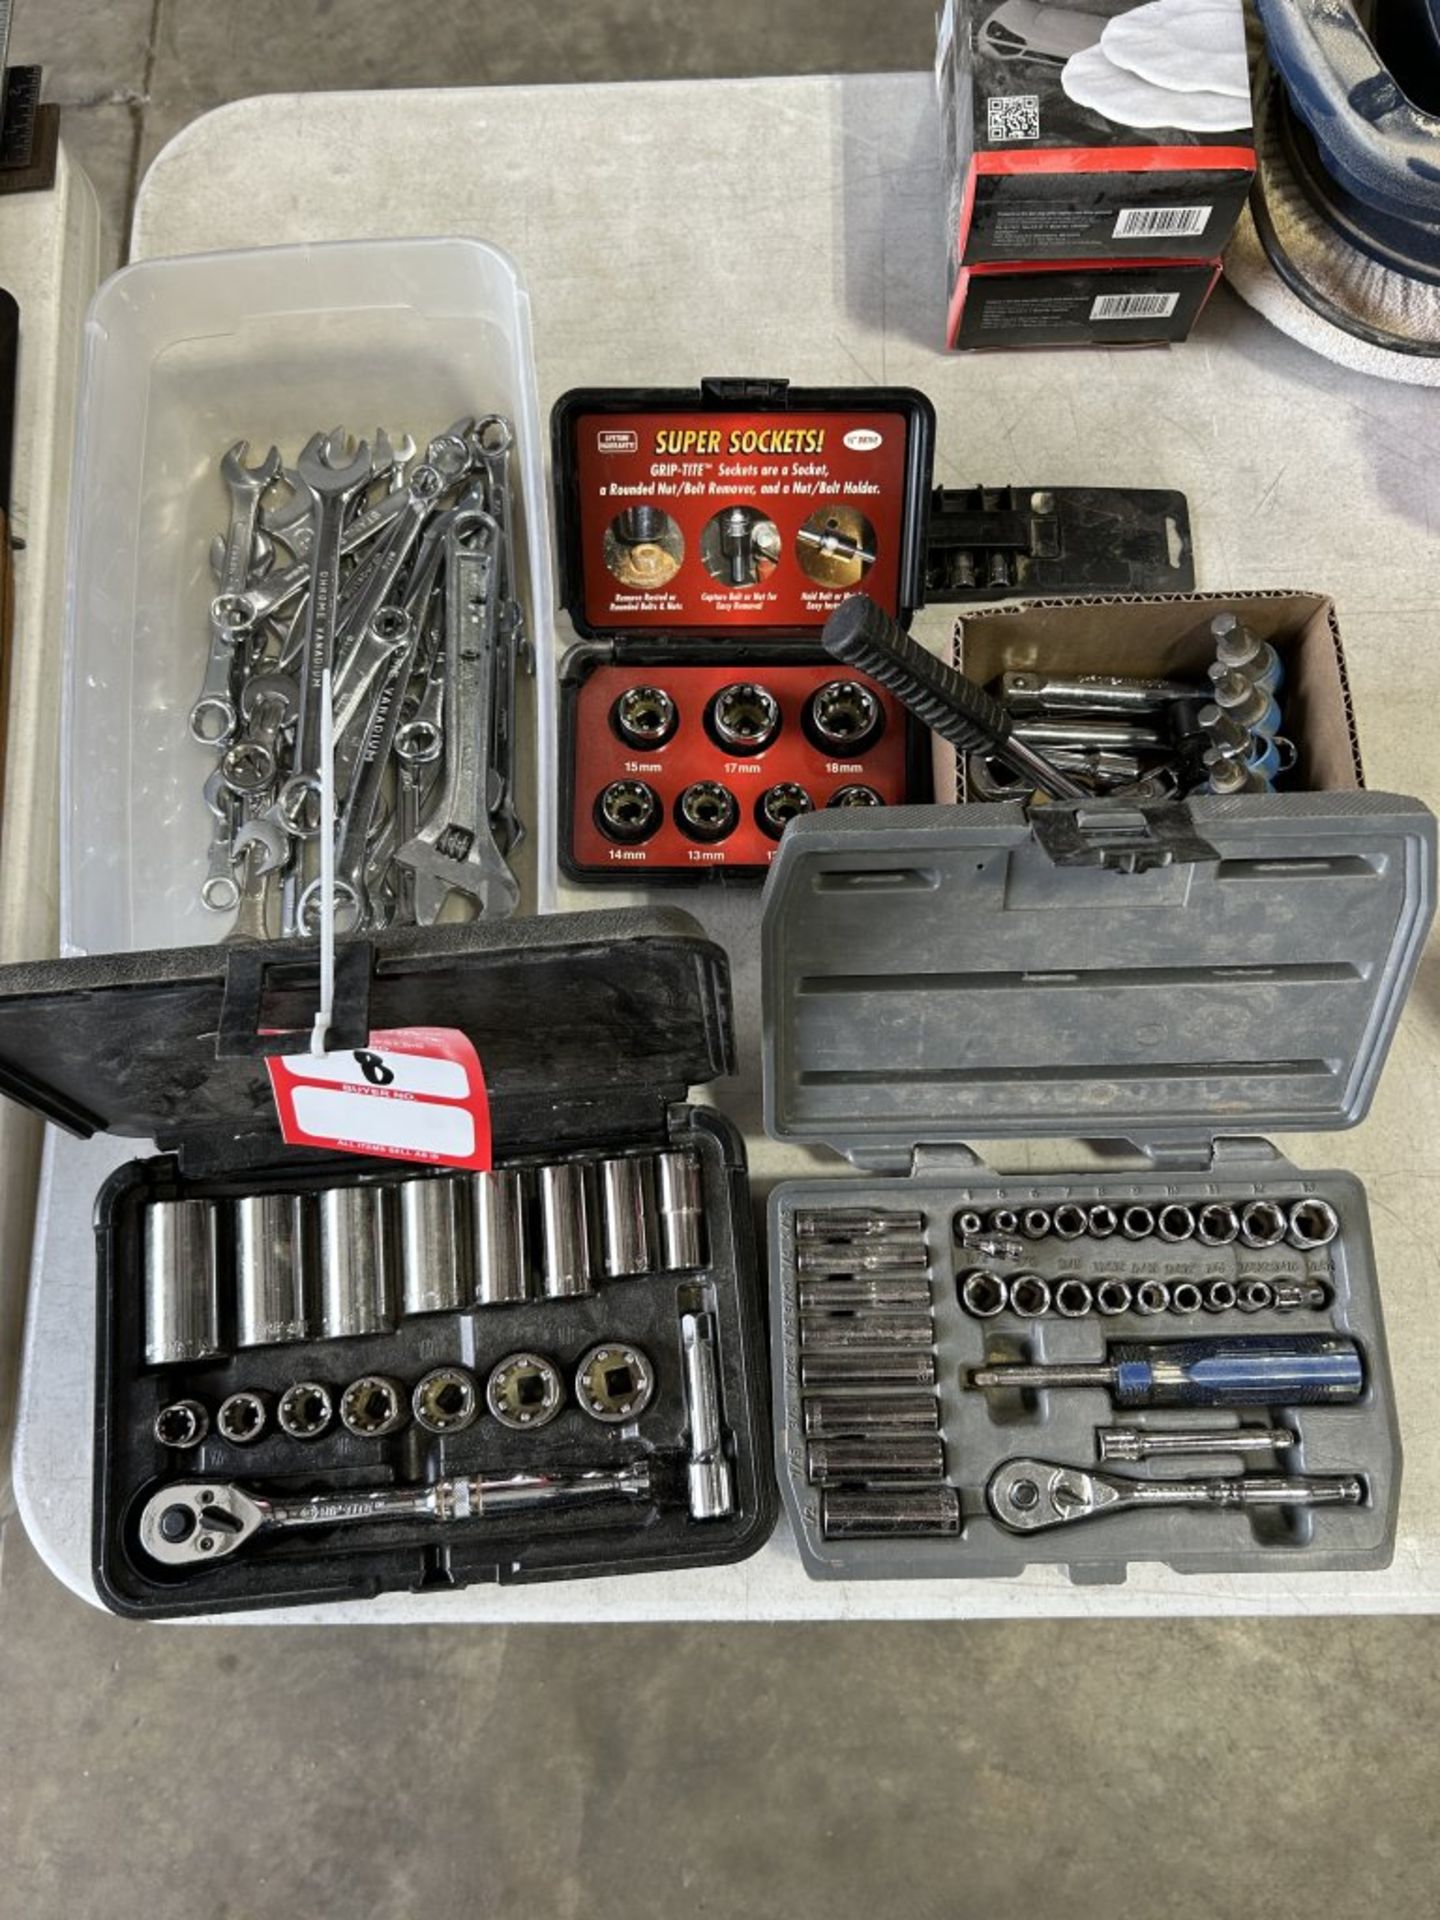 ASSORTED SOCKET SETS, WRENCHES, SUPER SOCKETS, ETC.